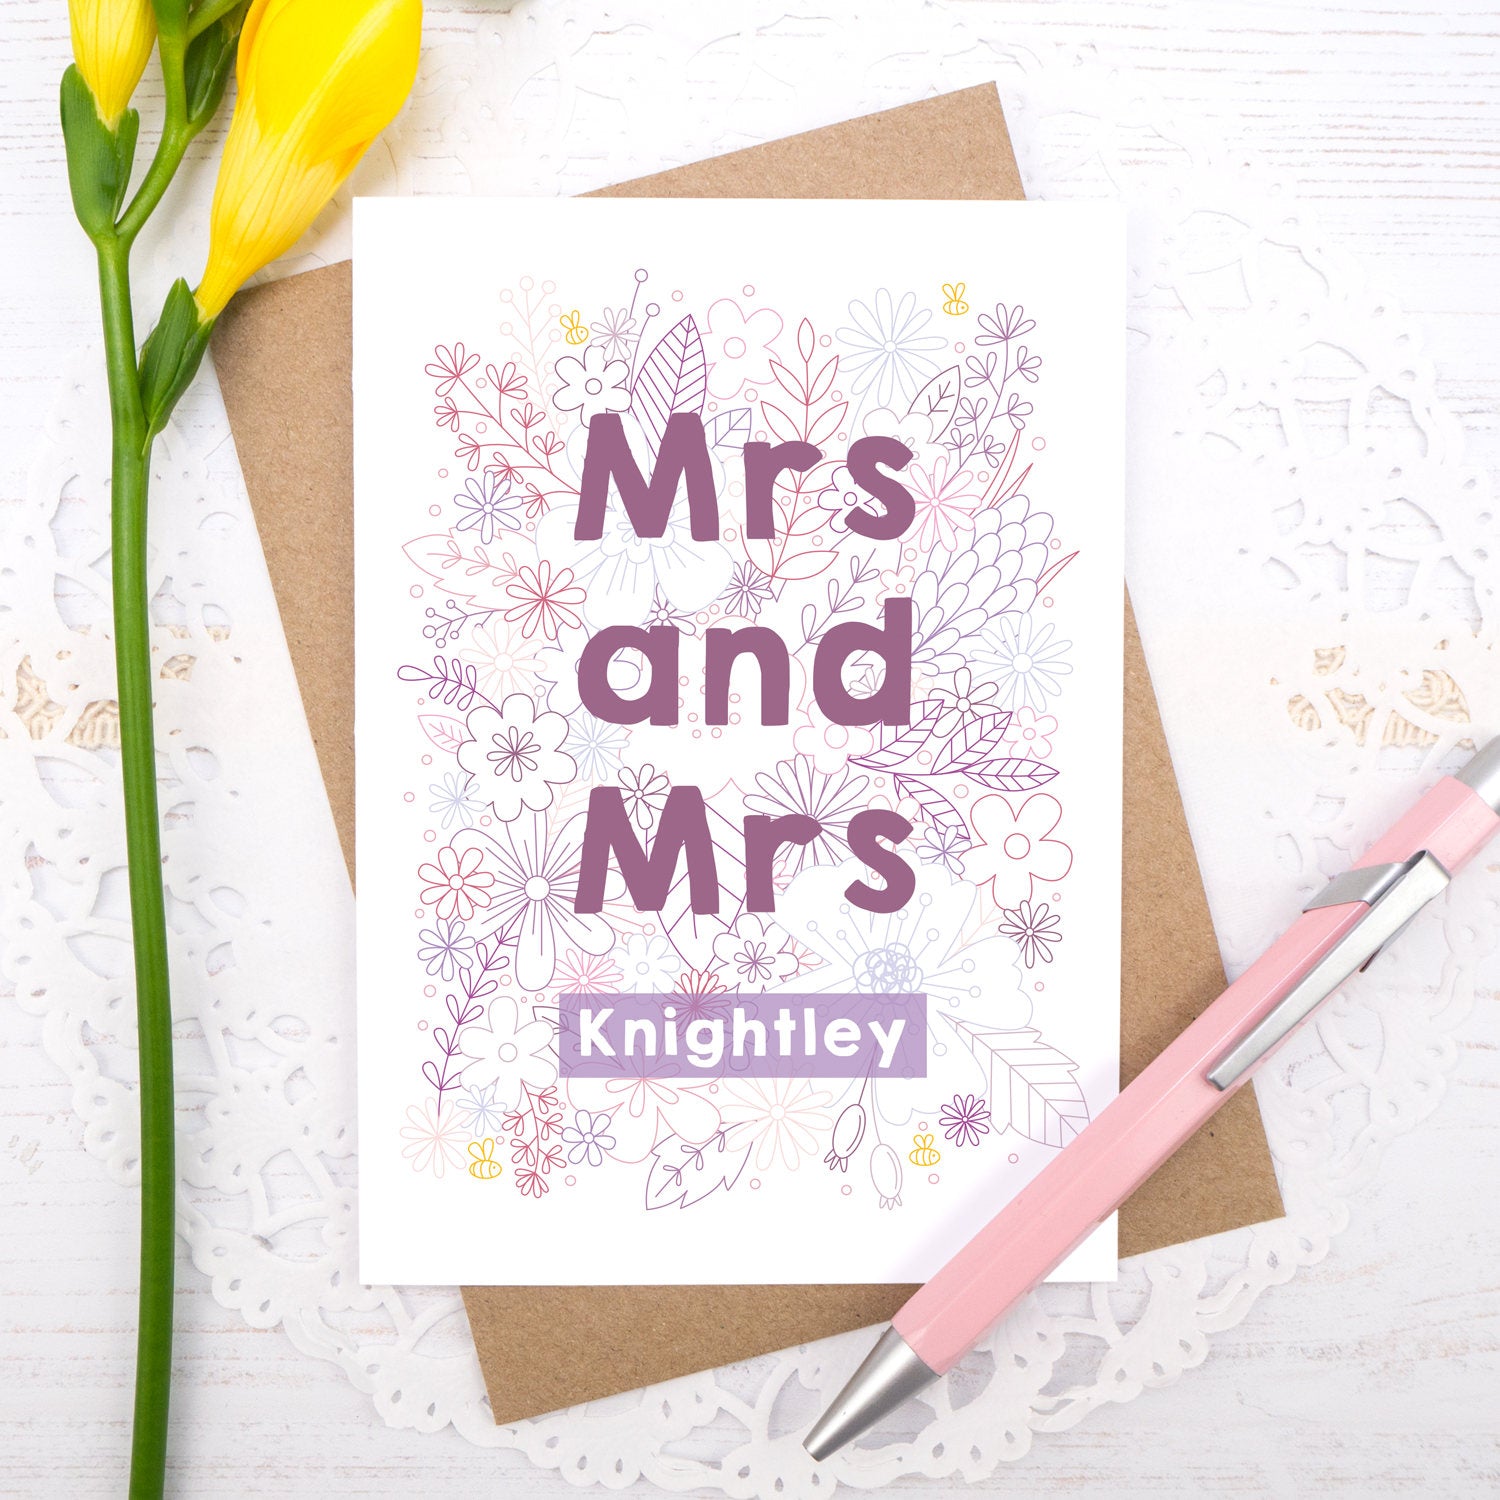 Personalised Mrs and Mrs happy couple card, suitable for weddings, civil partnerships or engagements